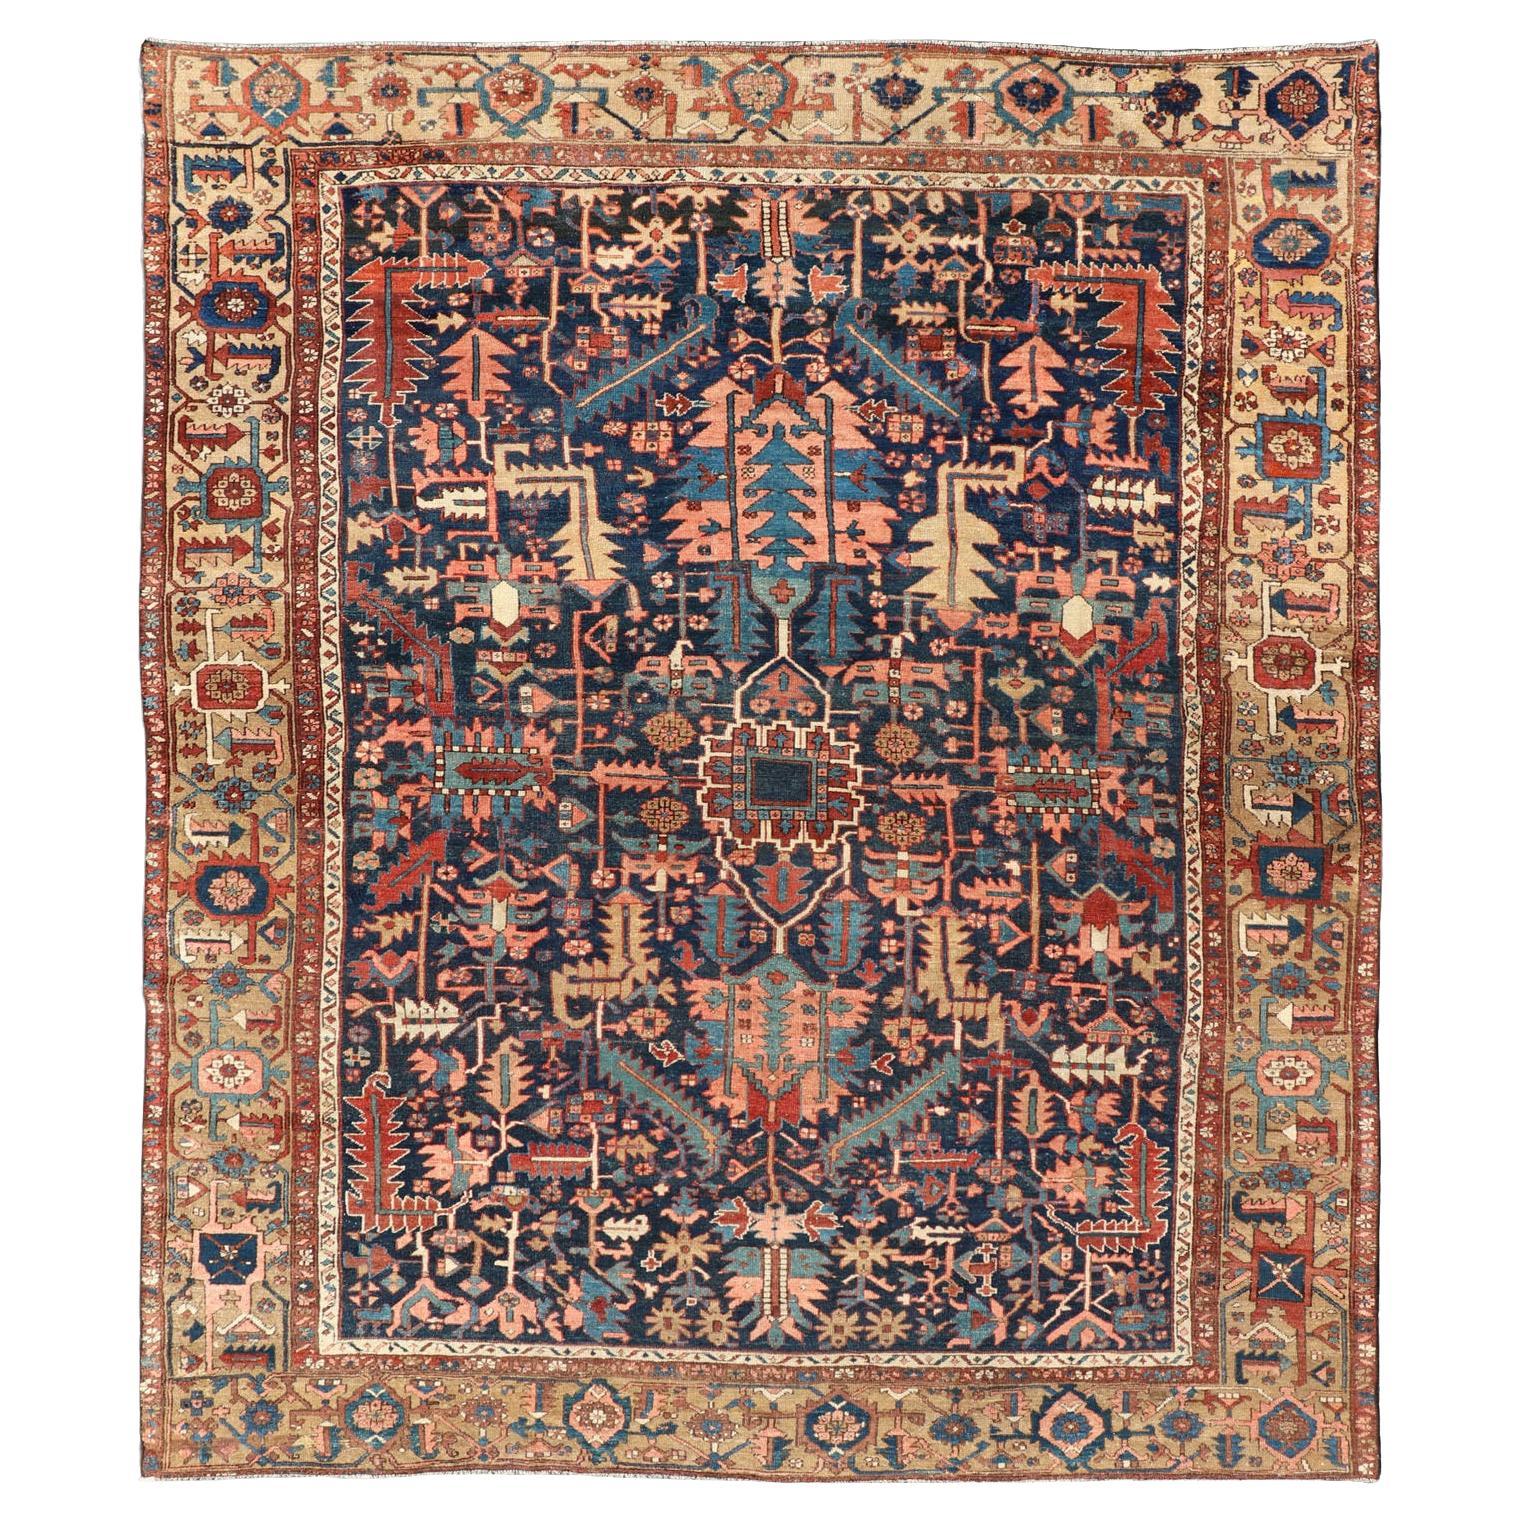 Antique Persian Heriz Rug with All-Over Sub-Geometric Design on a Blue Field